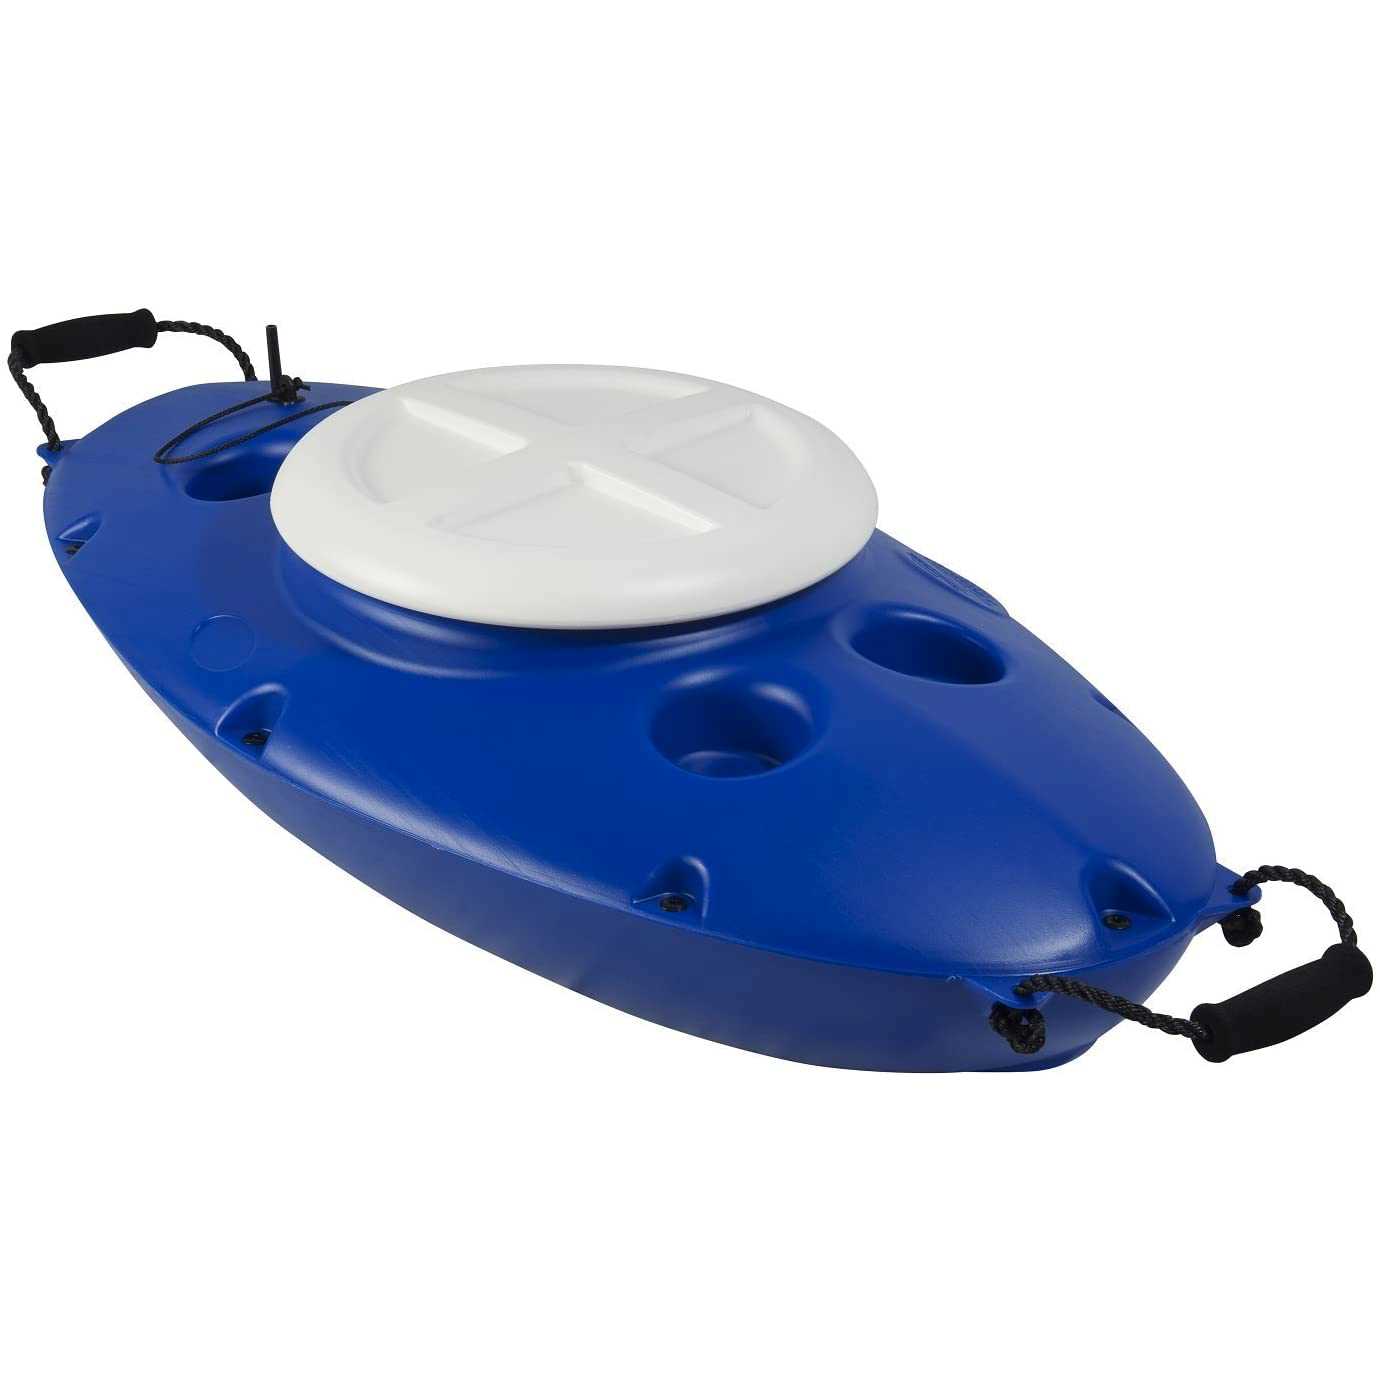 CreekKooler Mini Kayak Floating Cooler - Coolest Birthday Gifts For Guys Close Up